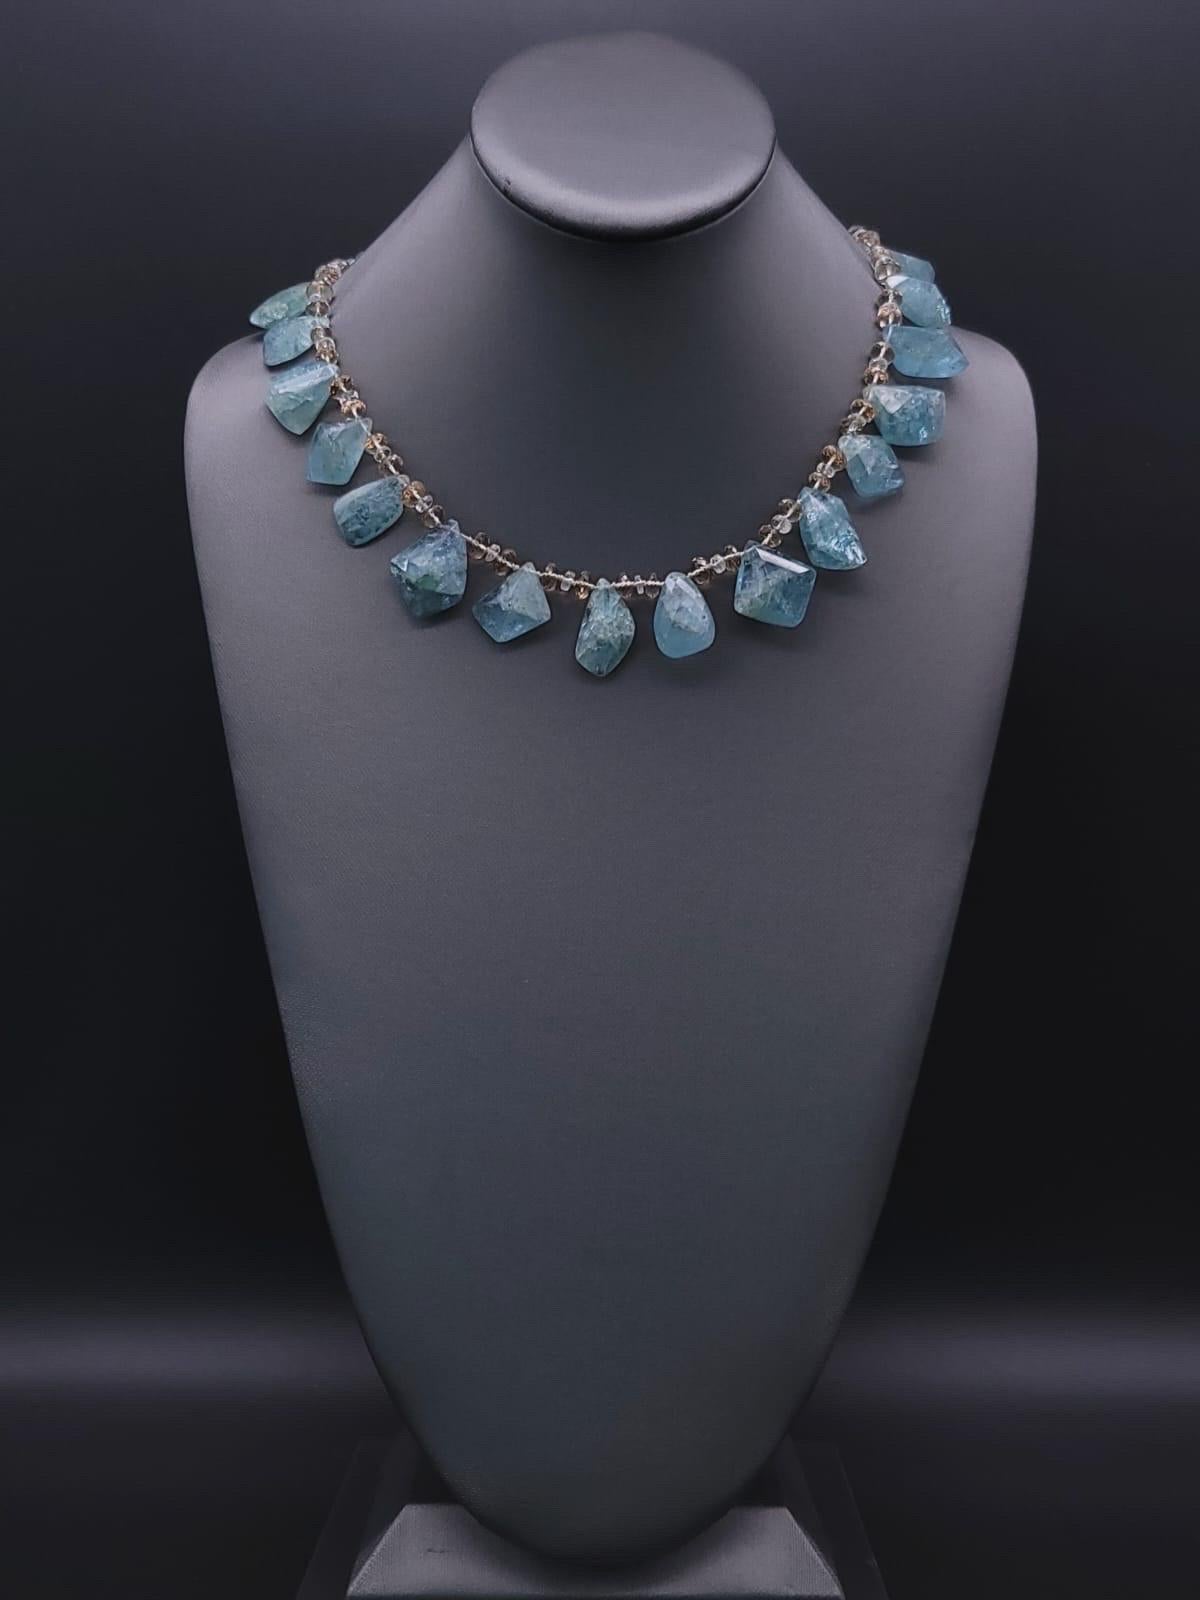 One-of-a-Kind

Aquamarine and Swarovski Crystal richly mixed in a super flattering necklace. Cut and polished aquamarine nuggets are separated with topaz Swarovski connected by a vintage Porcelain Limoges plaque of 2 Graces secure clasp. The soft